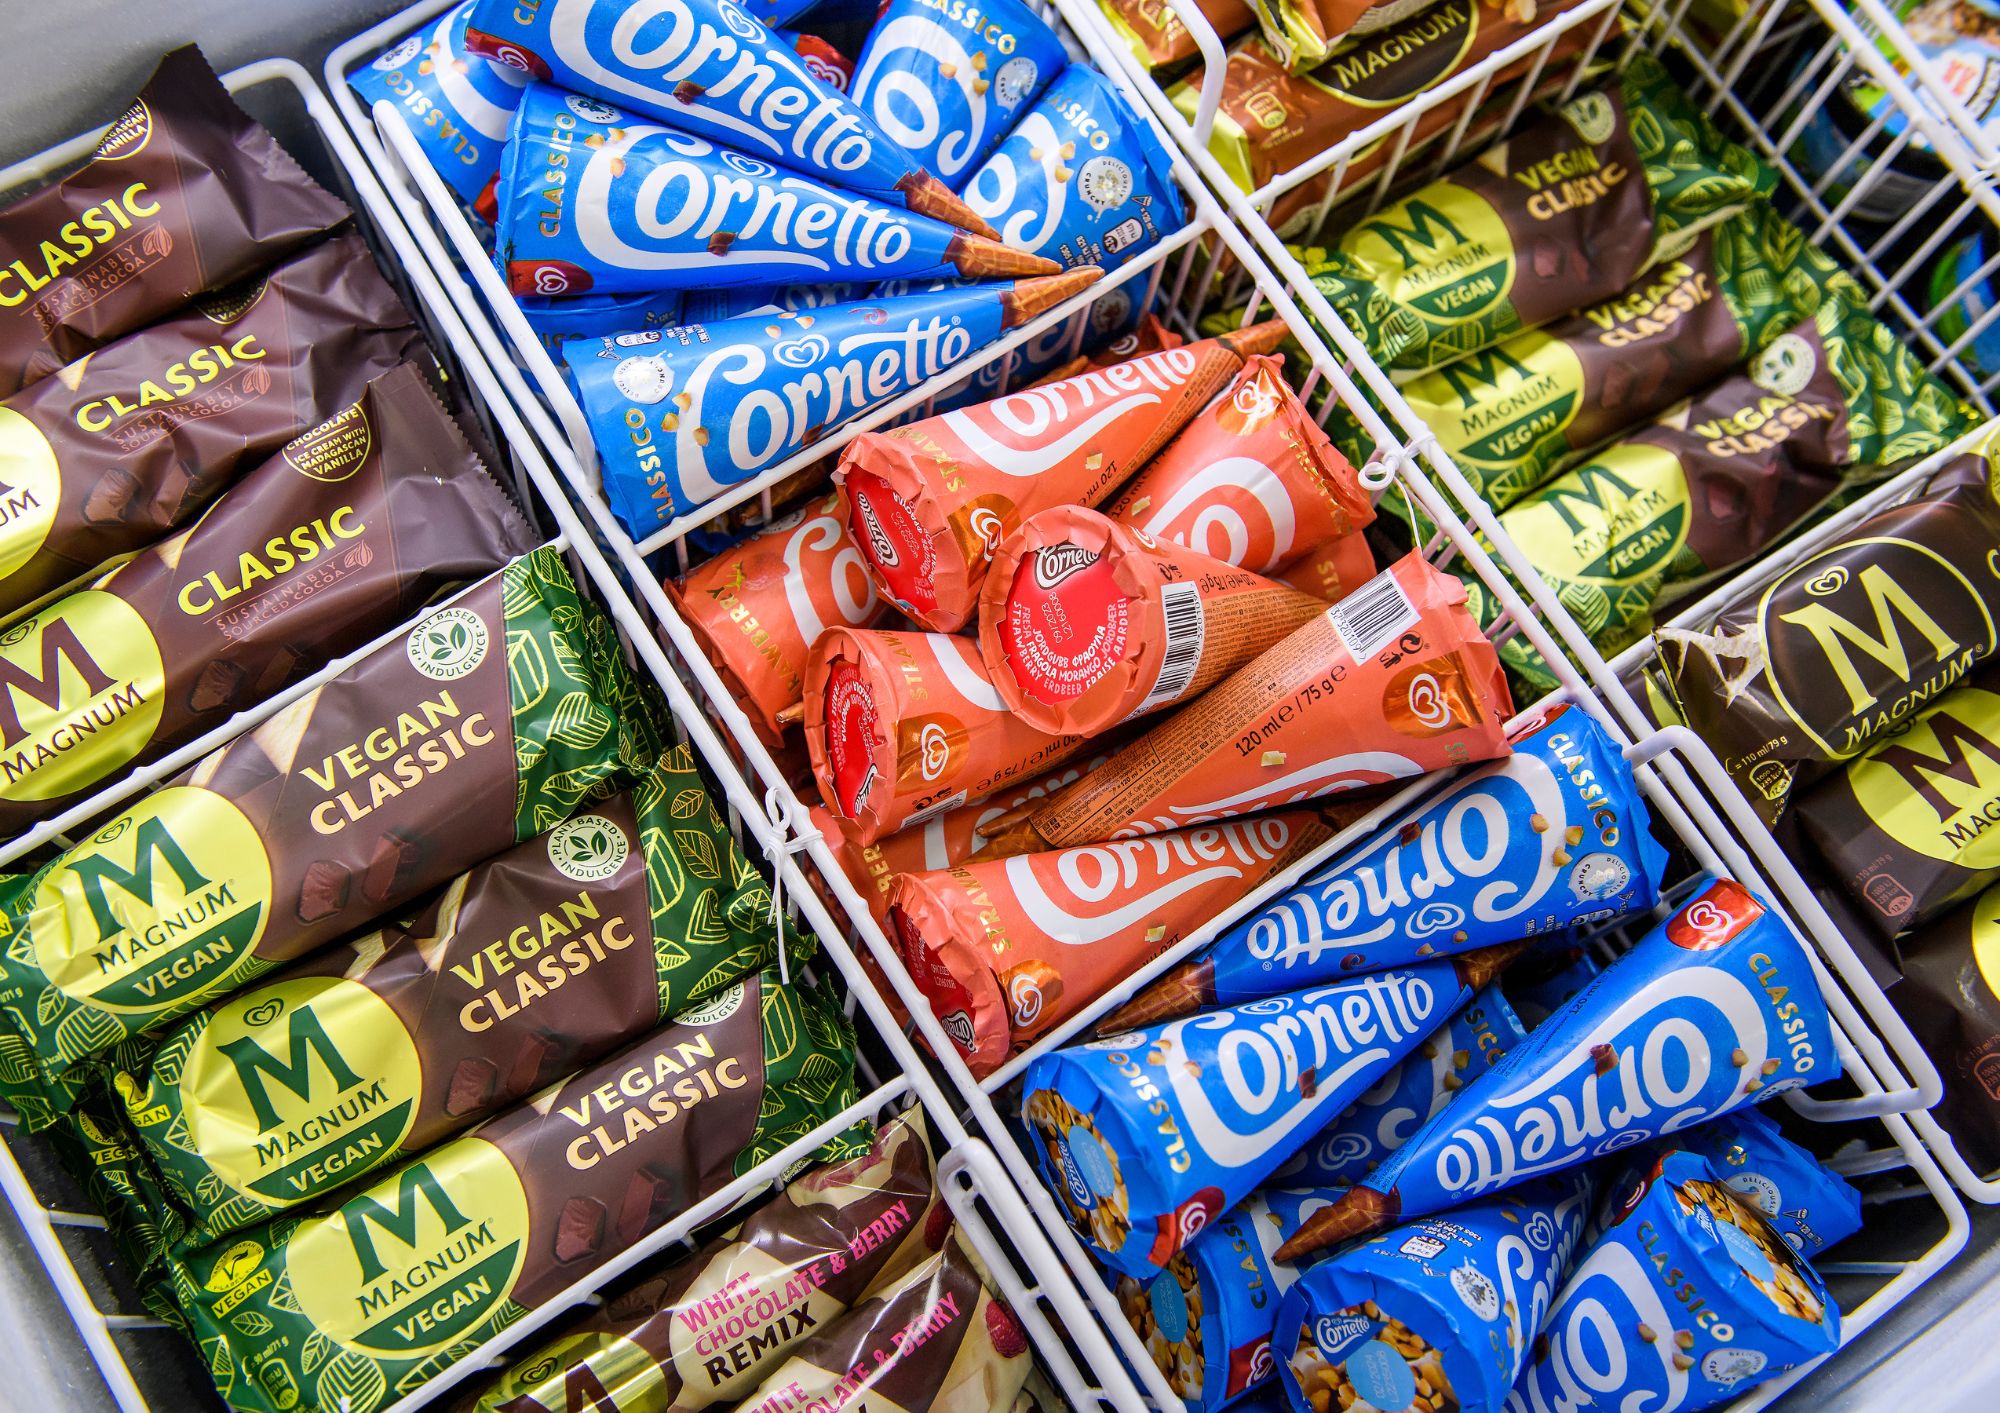 Unilever shares reformulation patents to combat freezer emissions in the ice cream sector